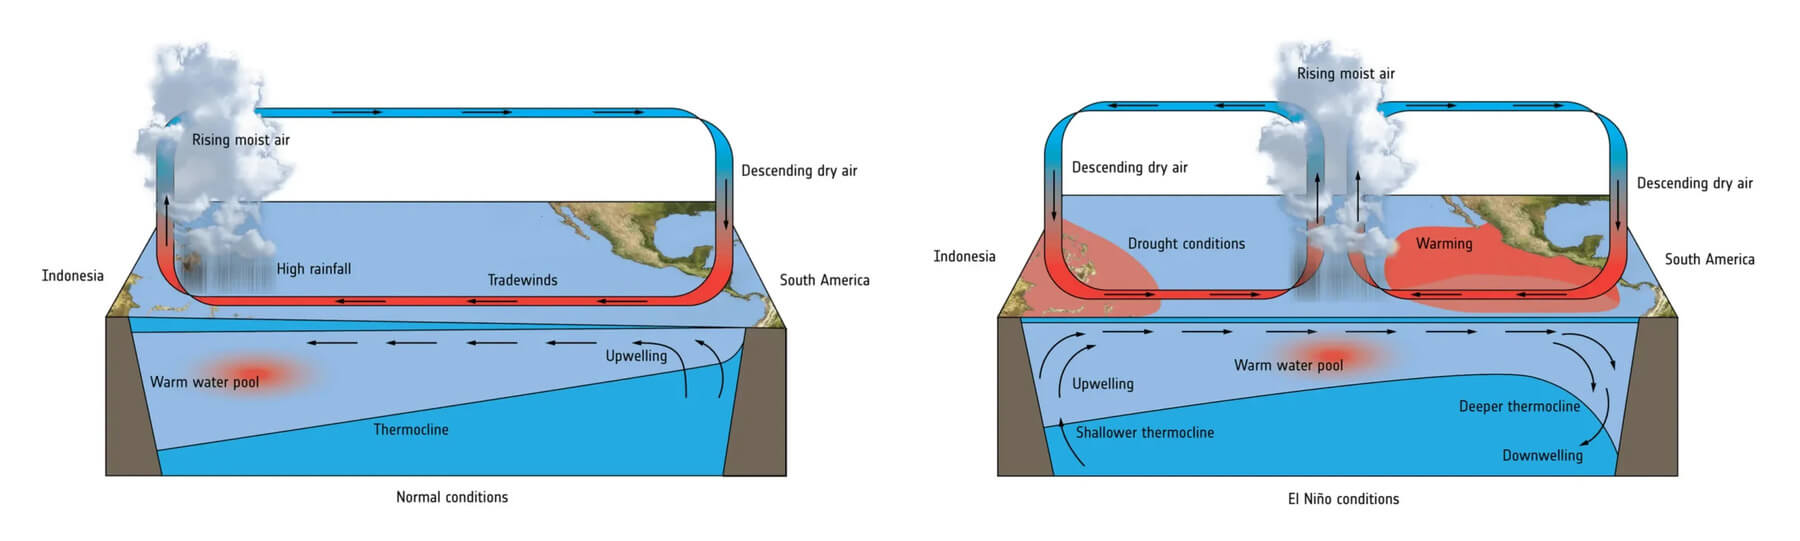 A side-by-side comparison of two diagrams illustrating oceanic and atmospheric currents during normal and El Niño conditions, respectively.